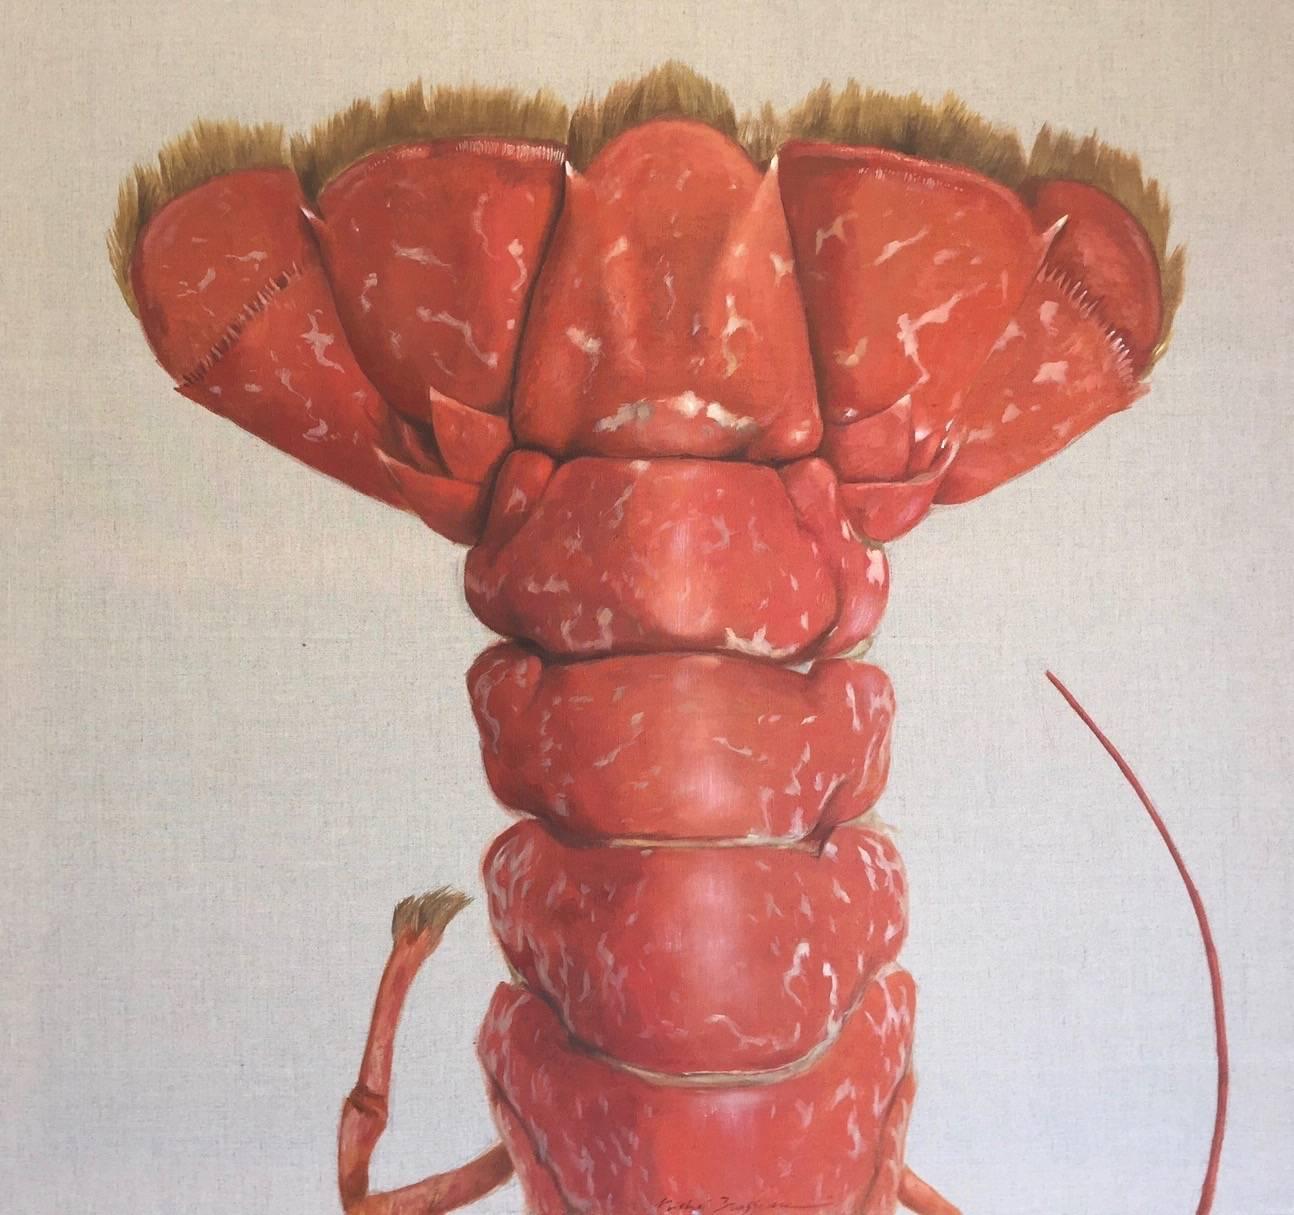 Michel Brosseau Animal Painting – "La Queue" Red Lobster Tail Painted on Exposed Linen